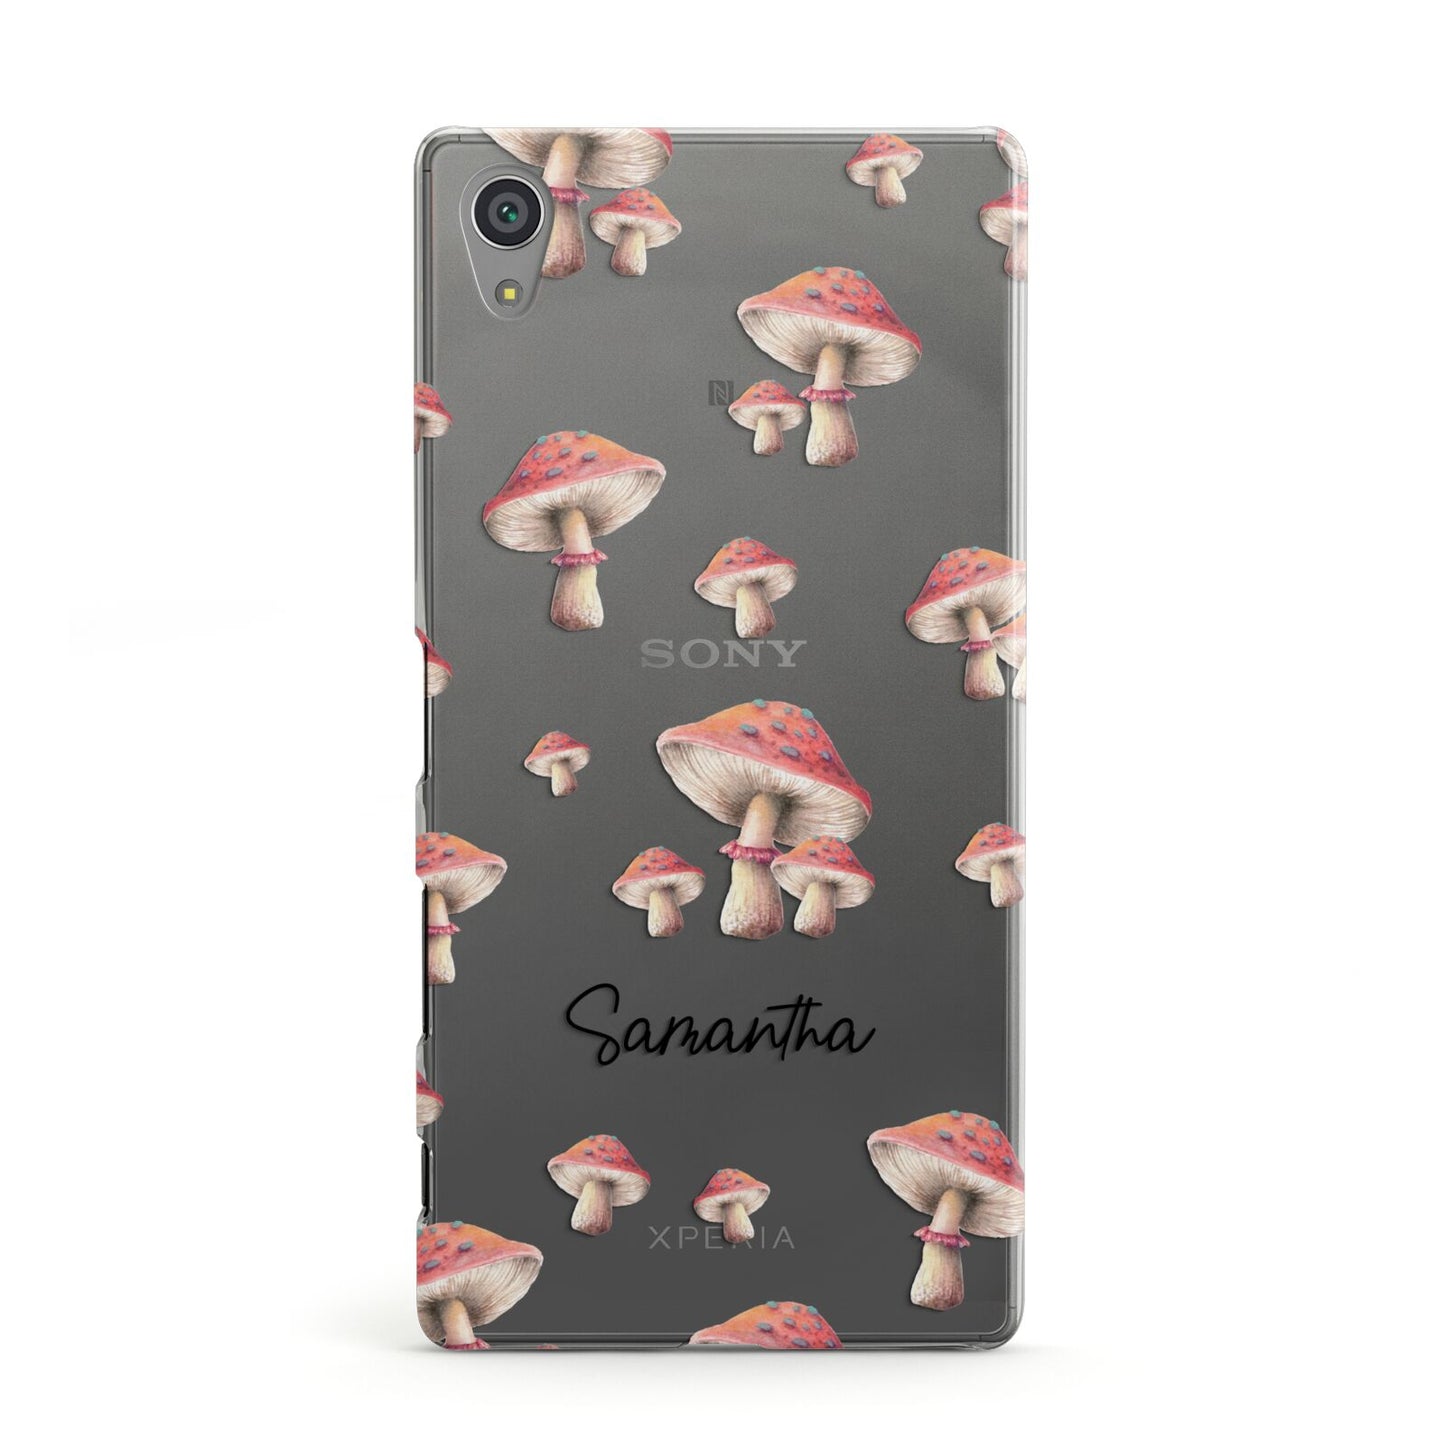 Mushroom Illustrations with Name Sony Xperia Case